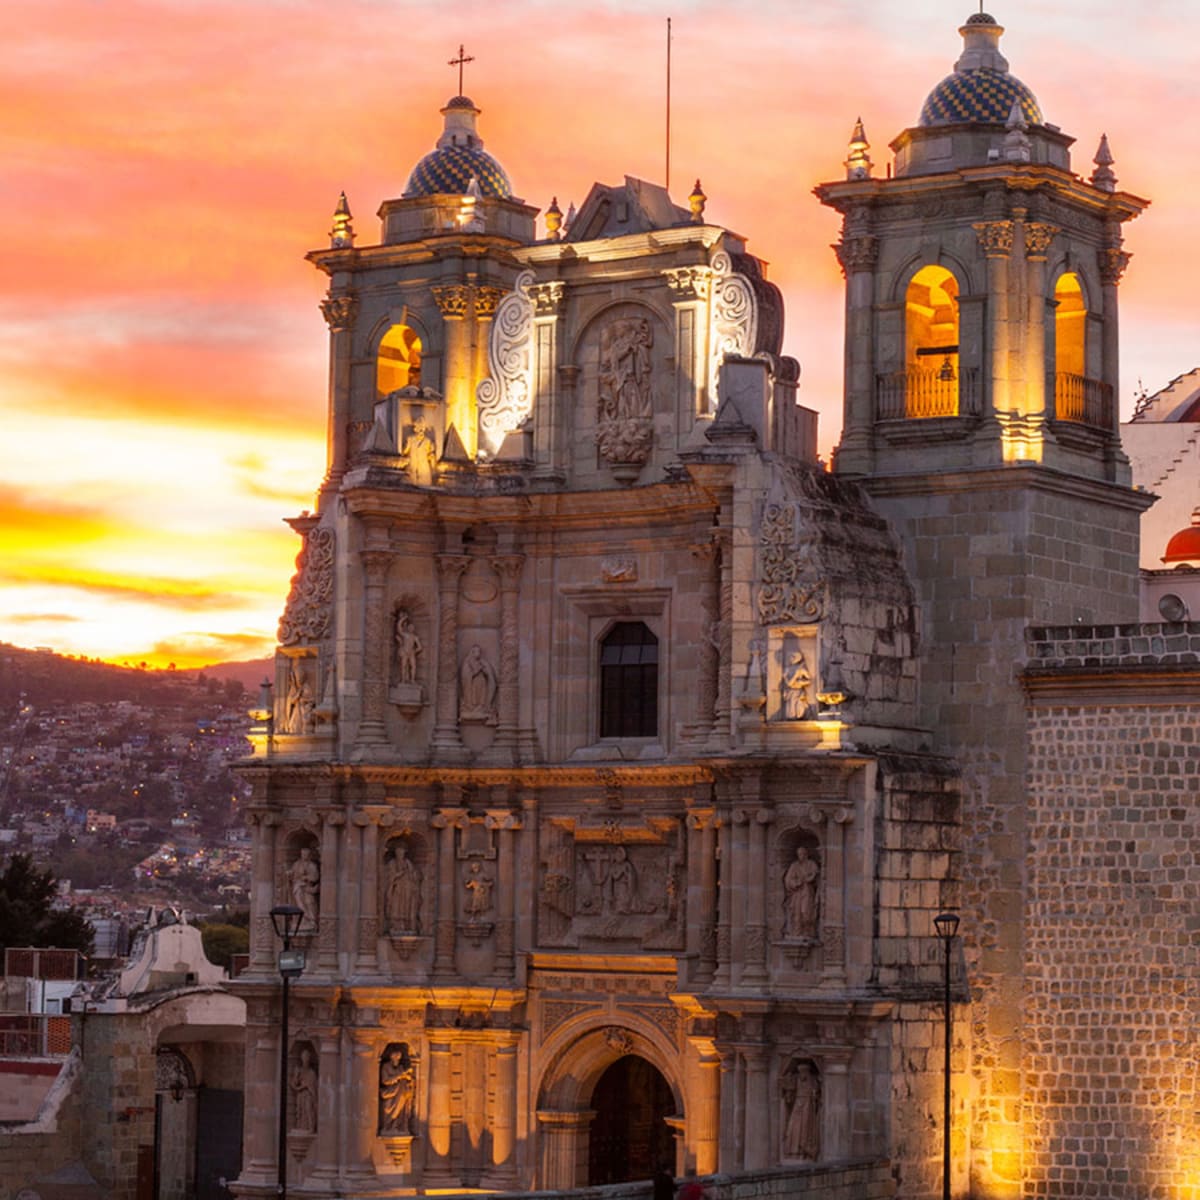 Oaxaca Travel Guide: 4 Days of Markets, Temples, and Mezcal - Men's Journal